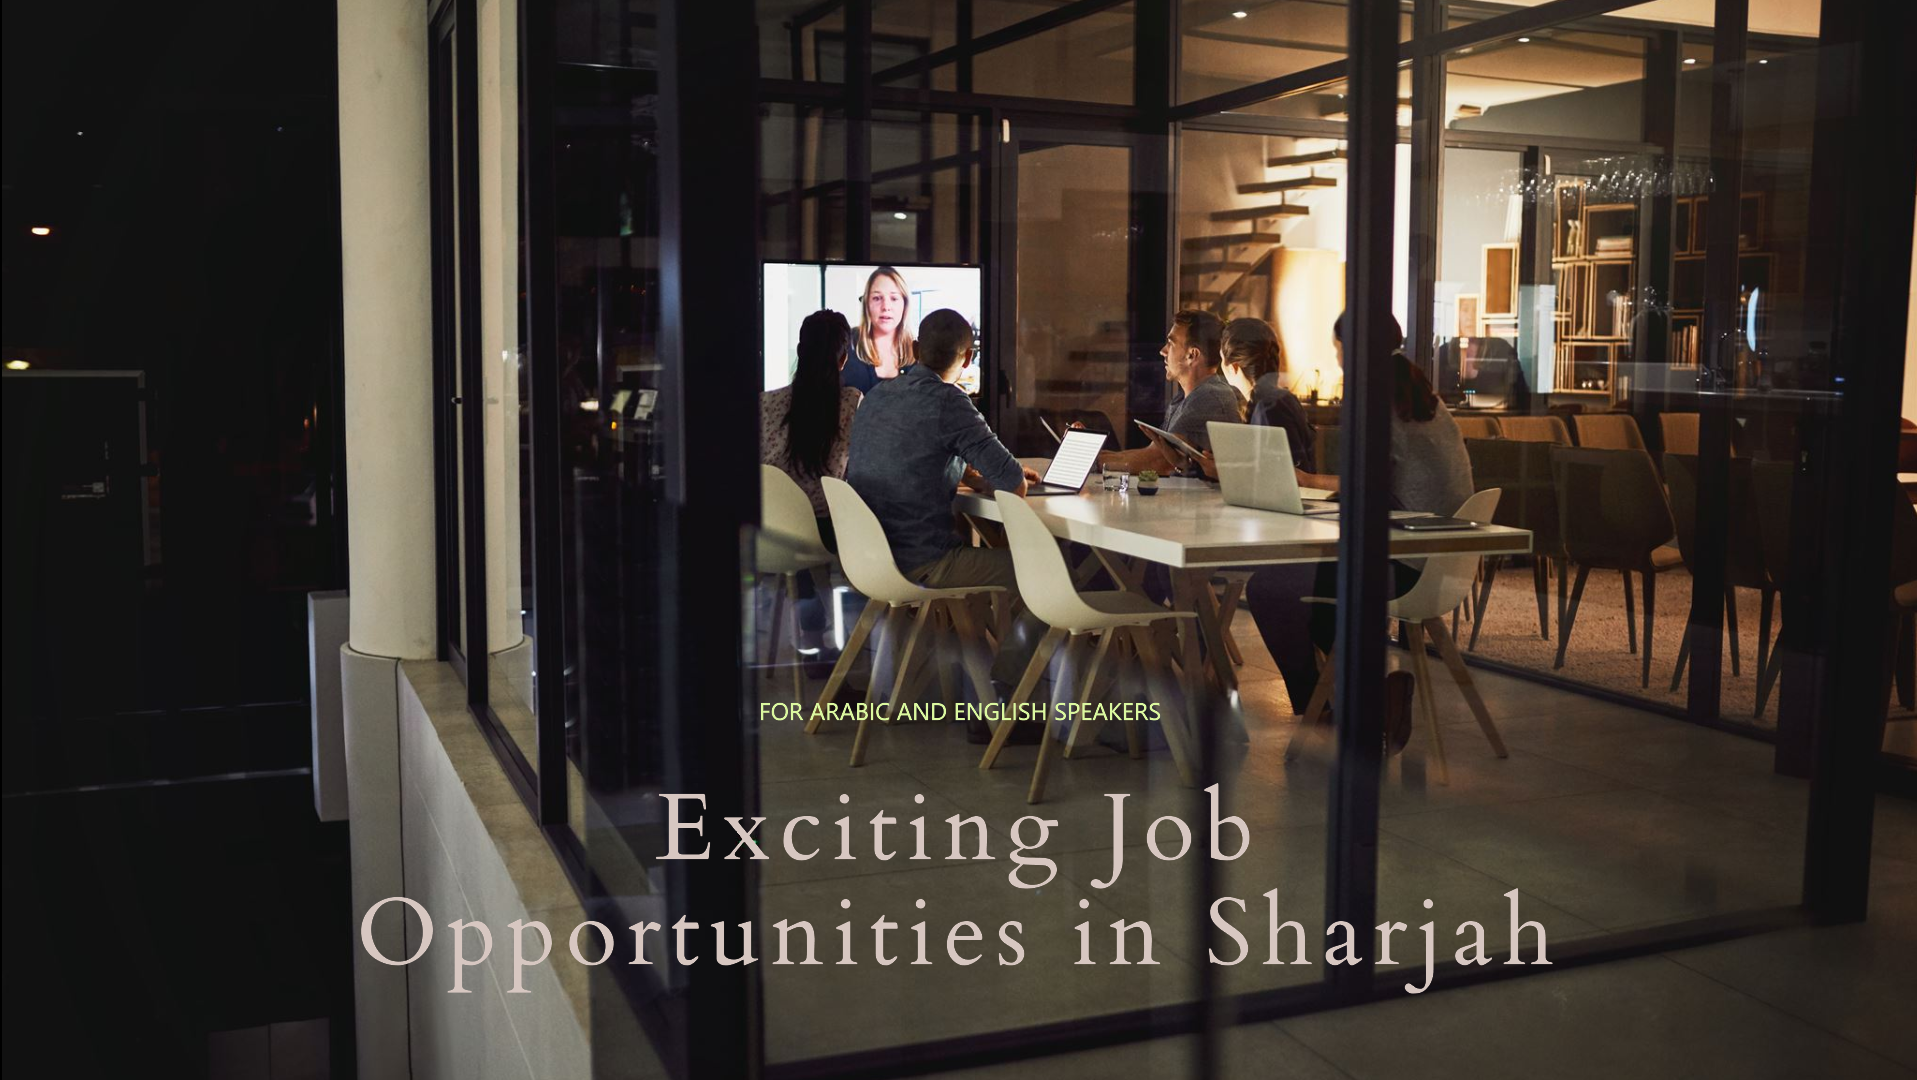 Job opportunities in Sharjah for Arabic and English speakers